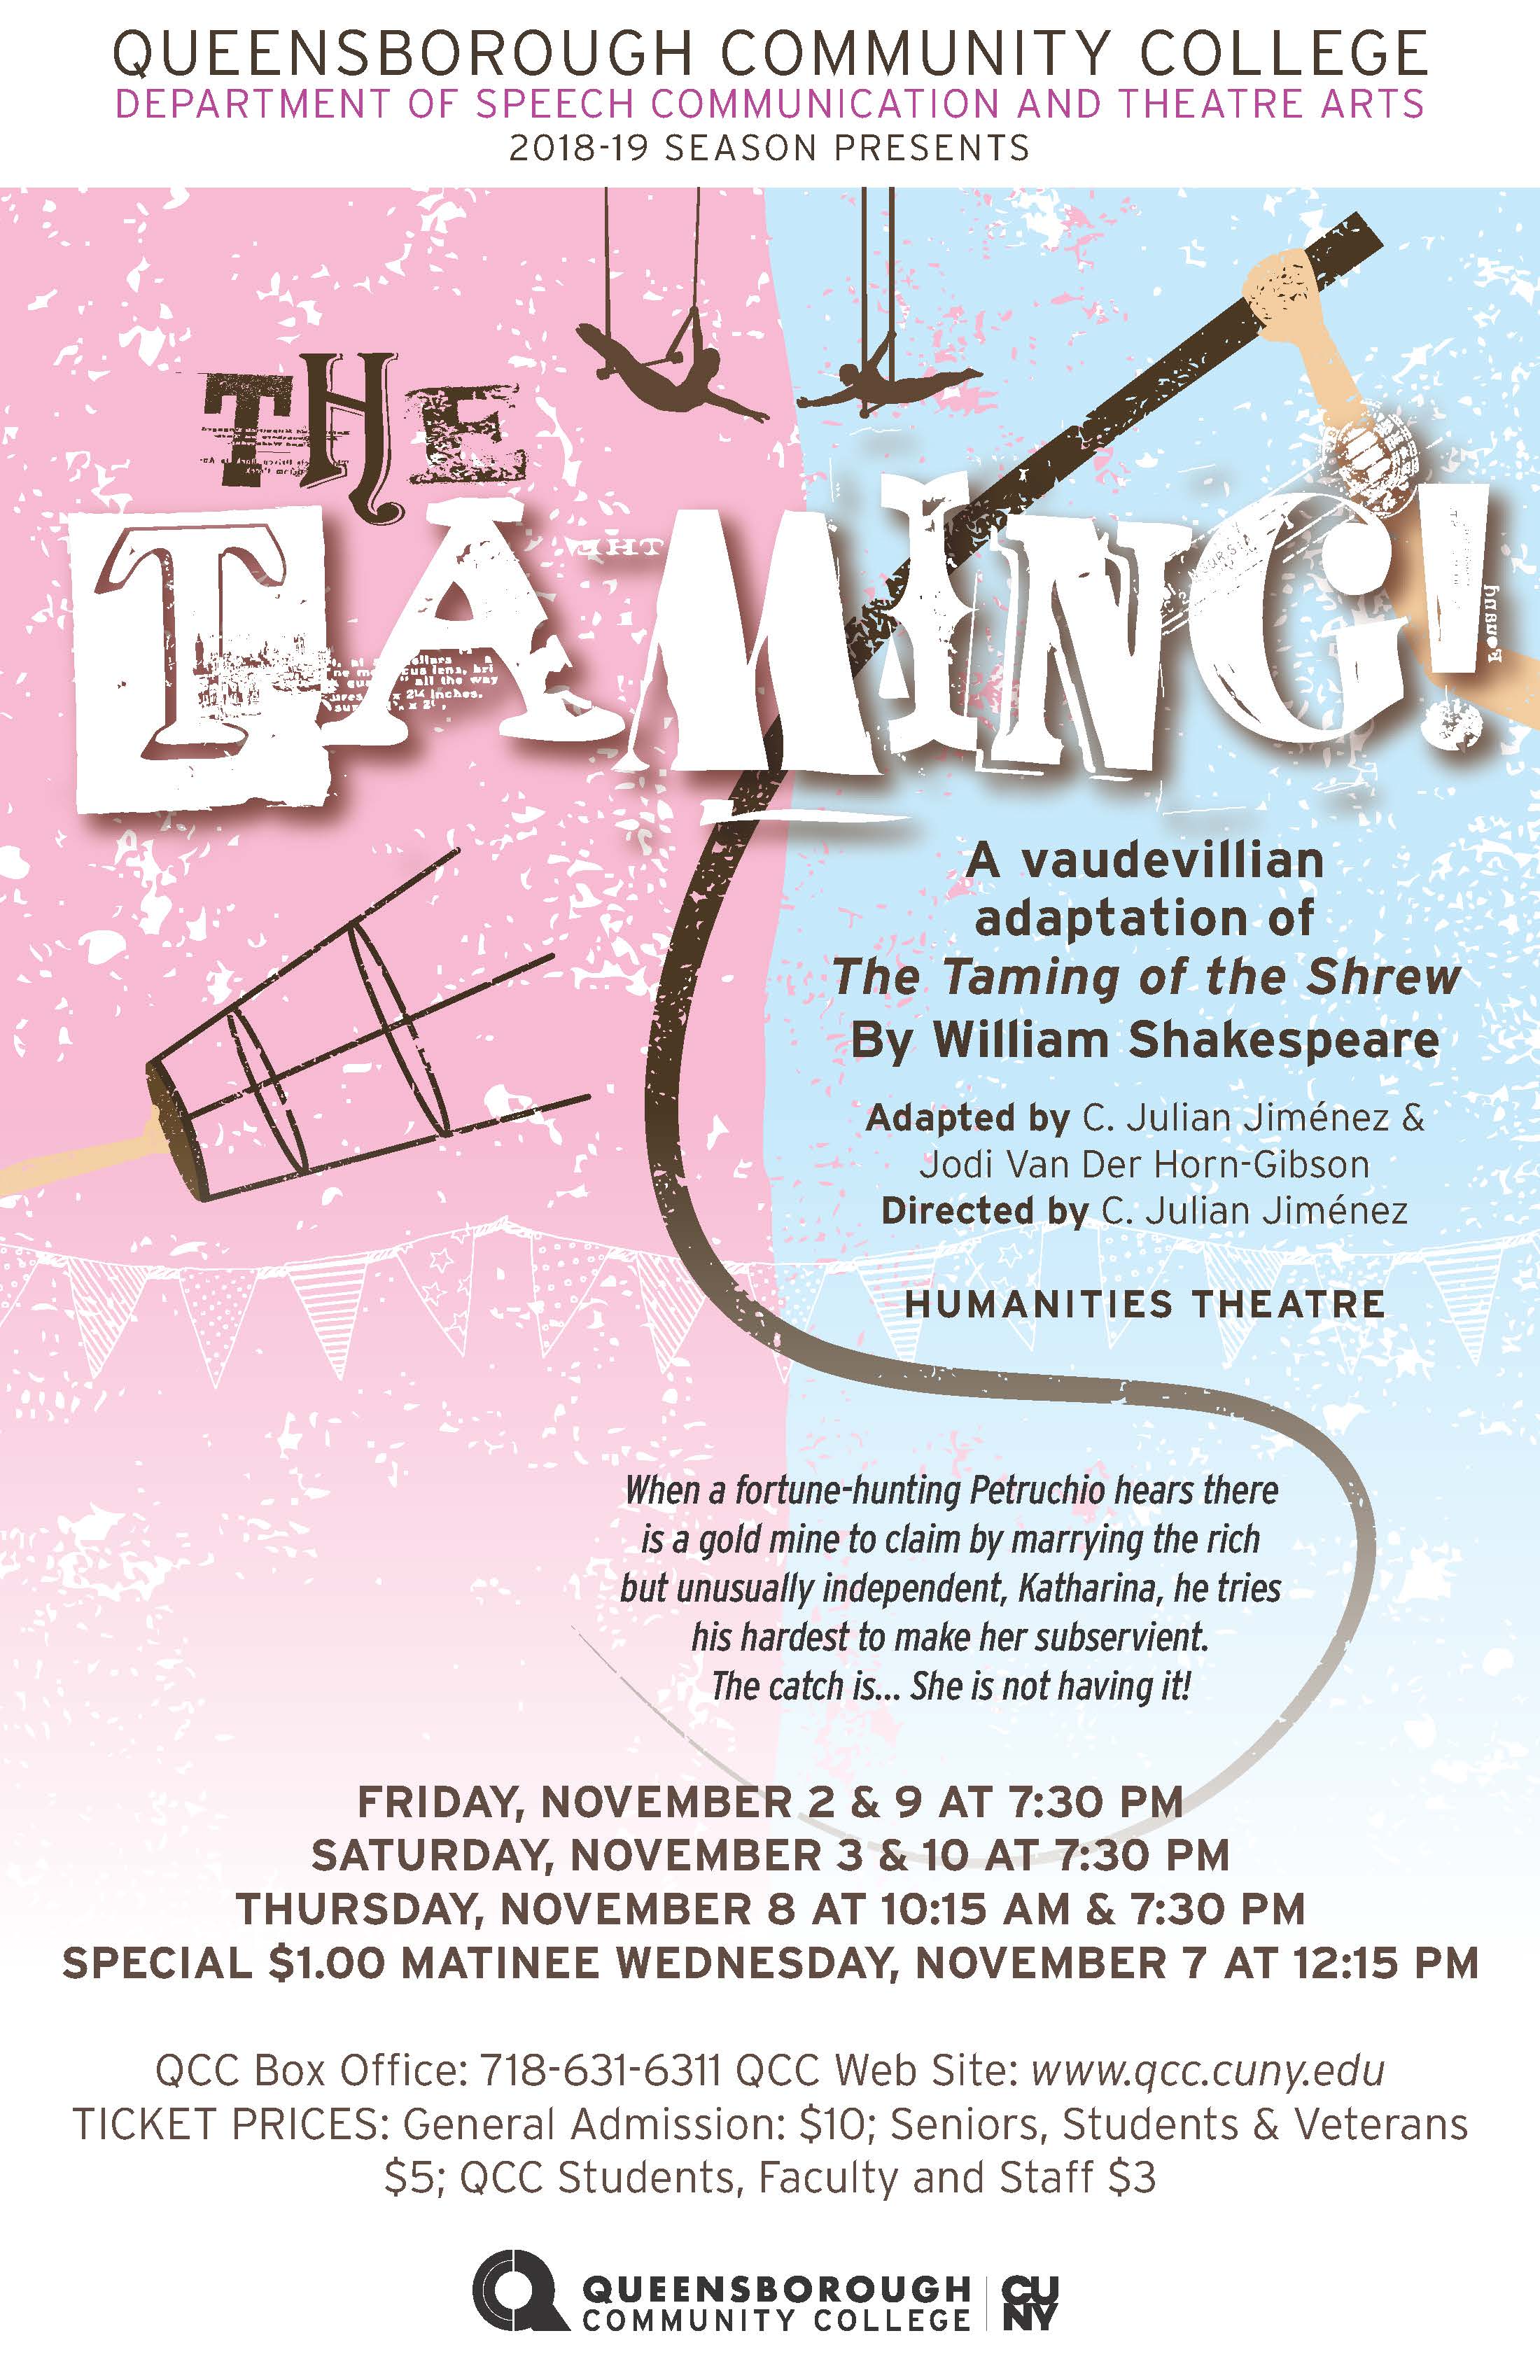 This is a poster for the fall 2018 production of ‘The Taming: A vaudevillian adaptation of The Taming of The Shrew by William Shakespeare’, adapted and directed by Professor Jiménez. The poster displays trapeze artists flying through the air.